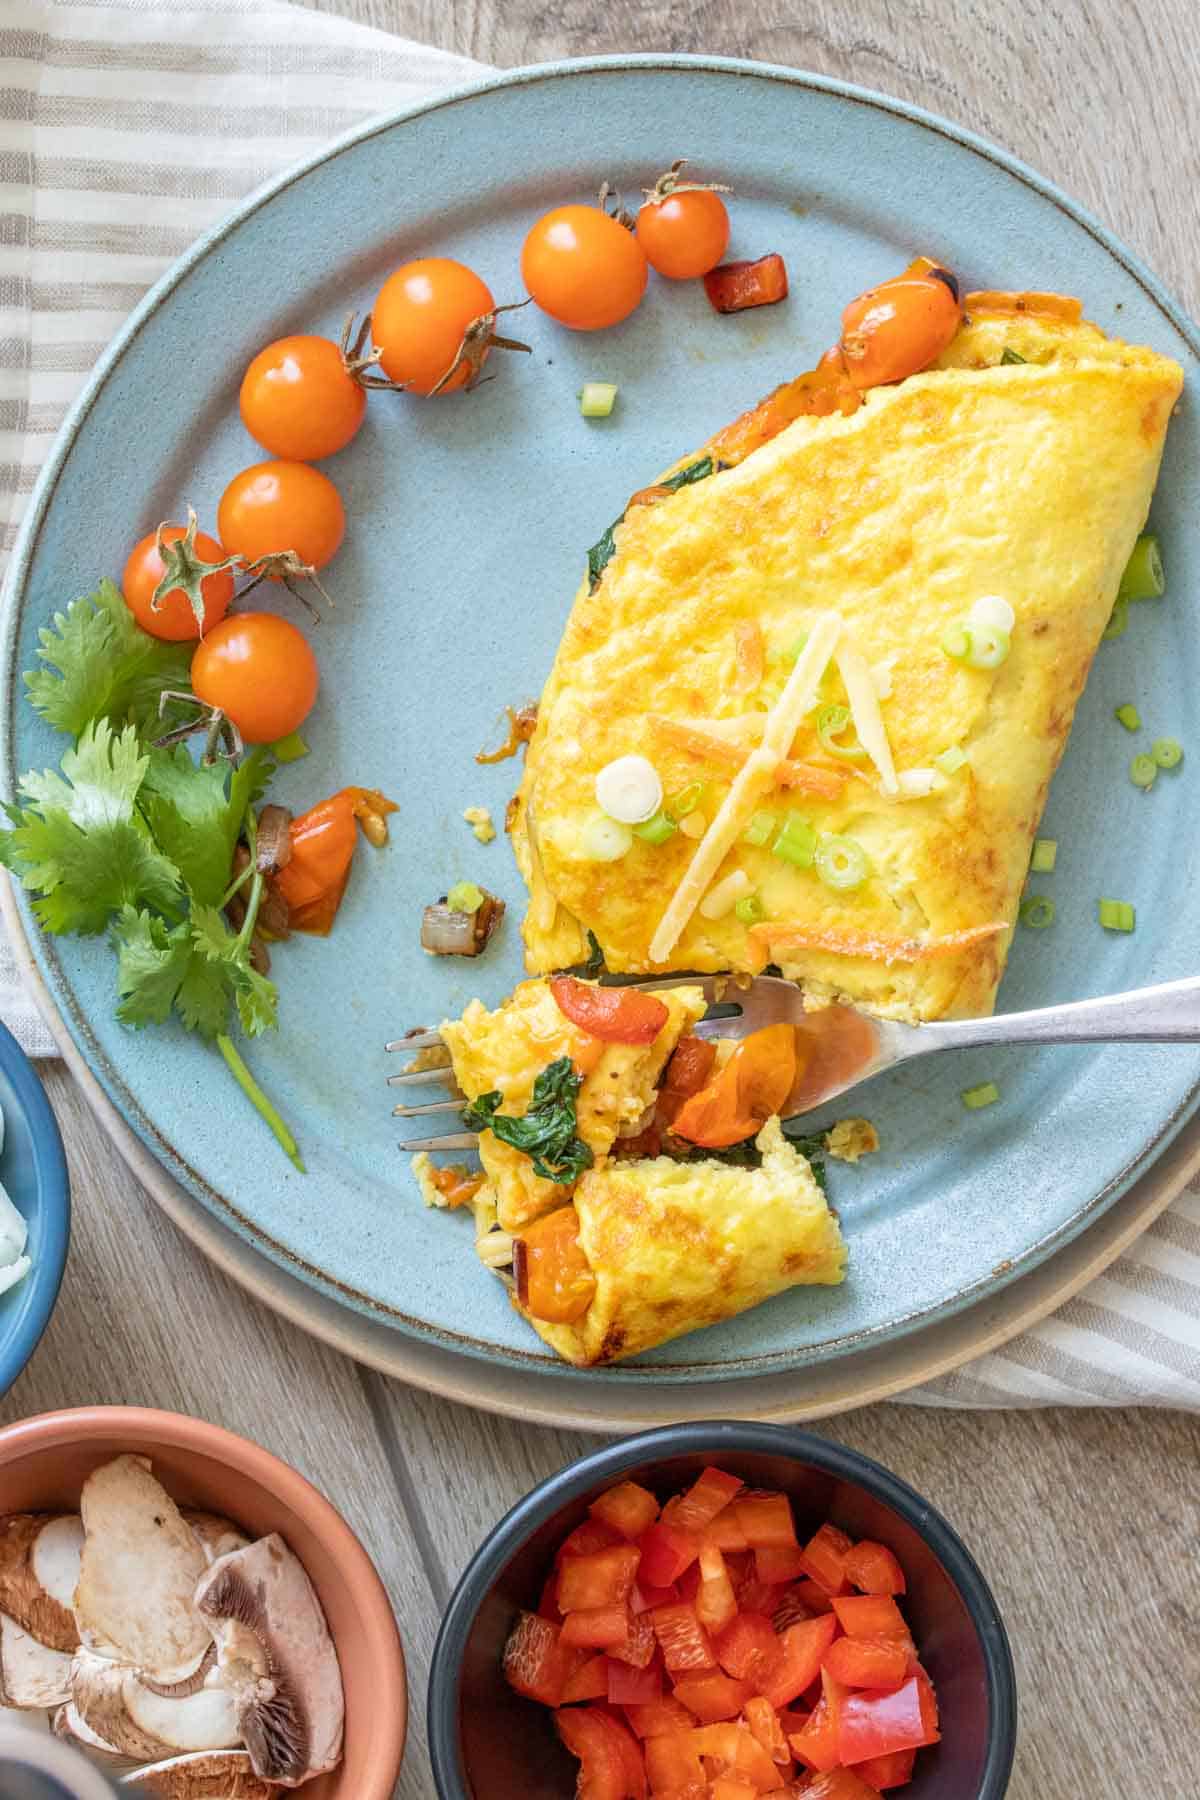 A fork getting a bite from a veggie omelet on a blue plate next to cherry tomatoes on a blue plate